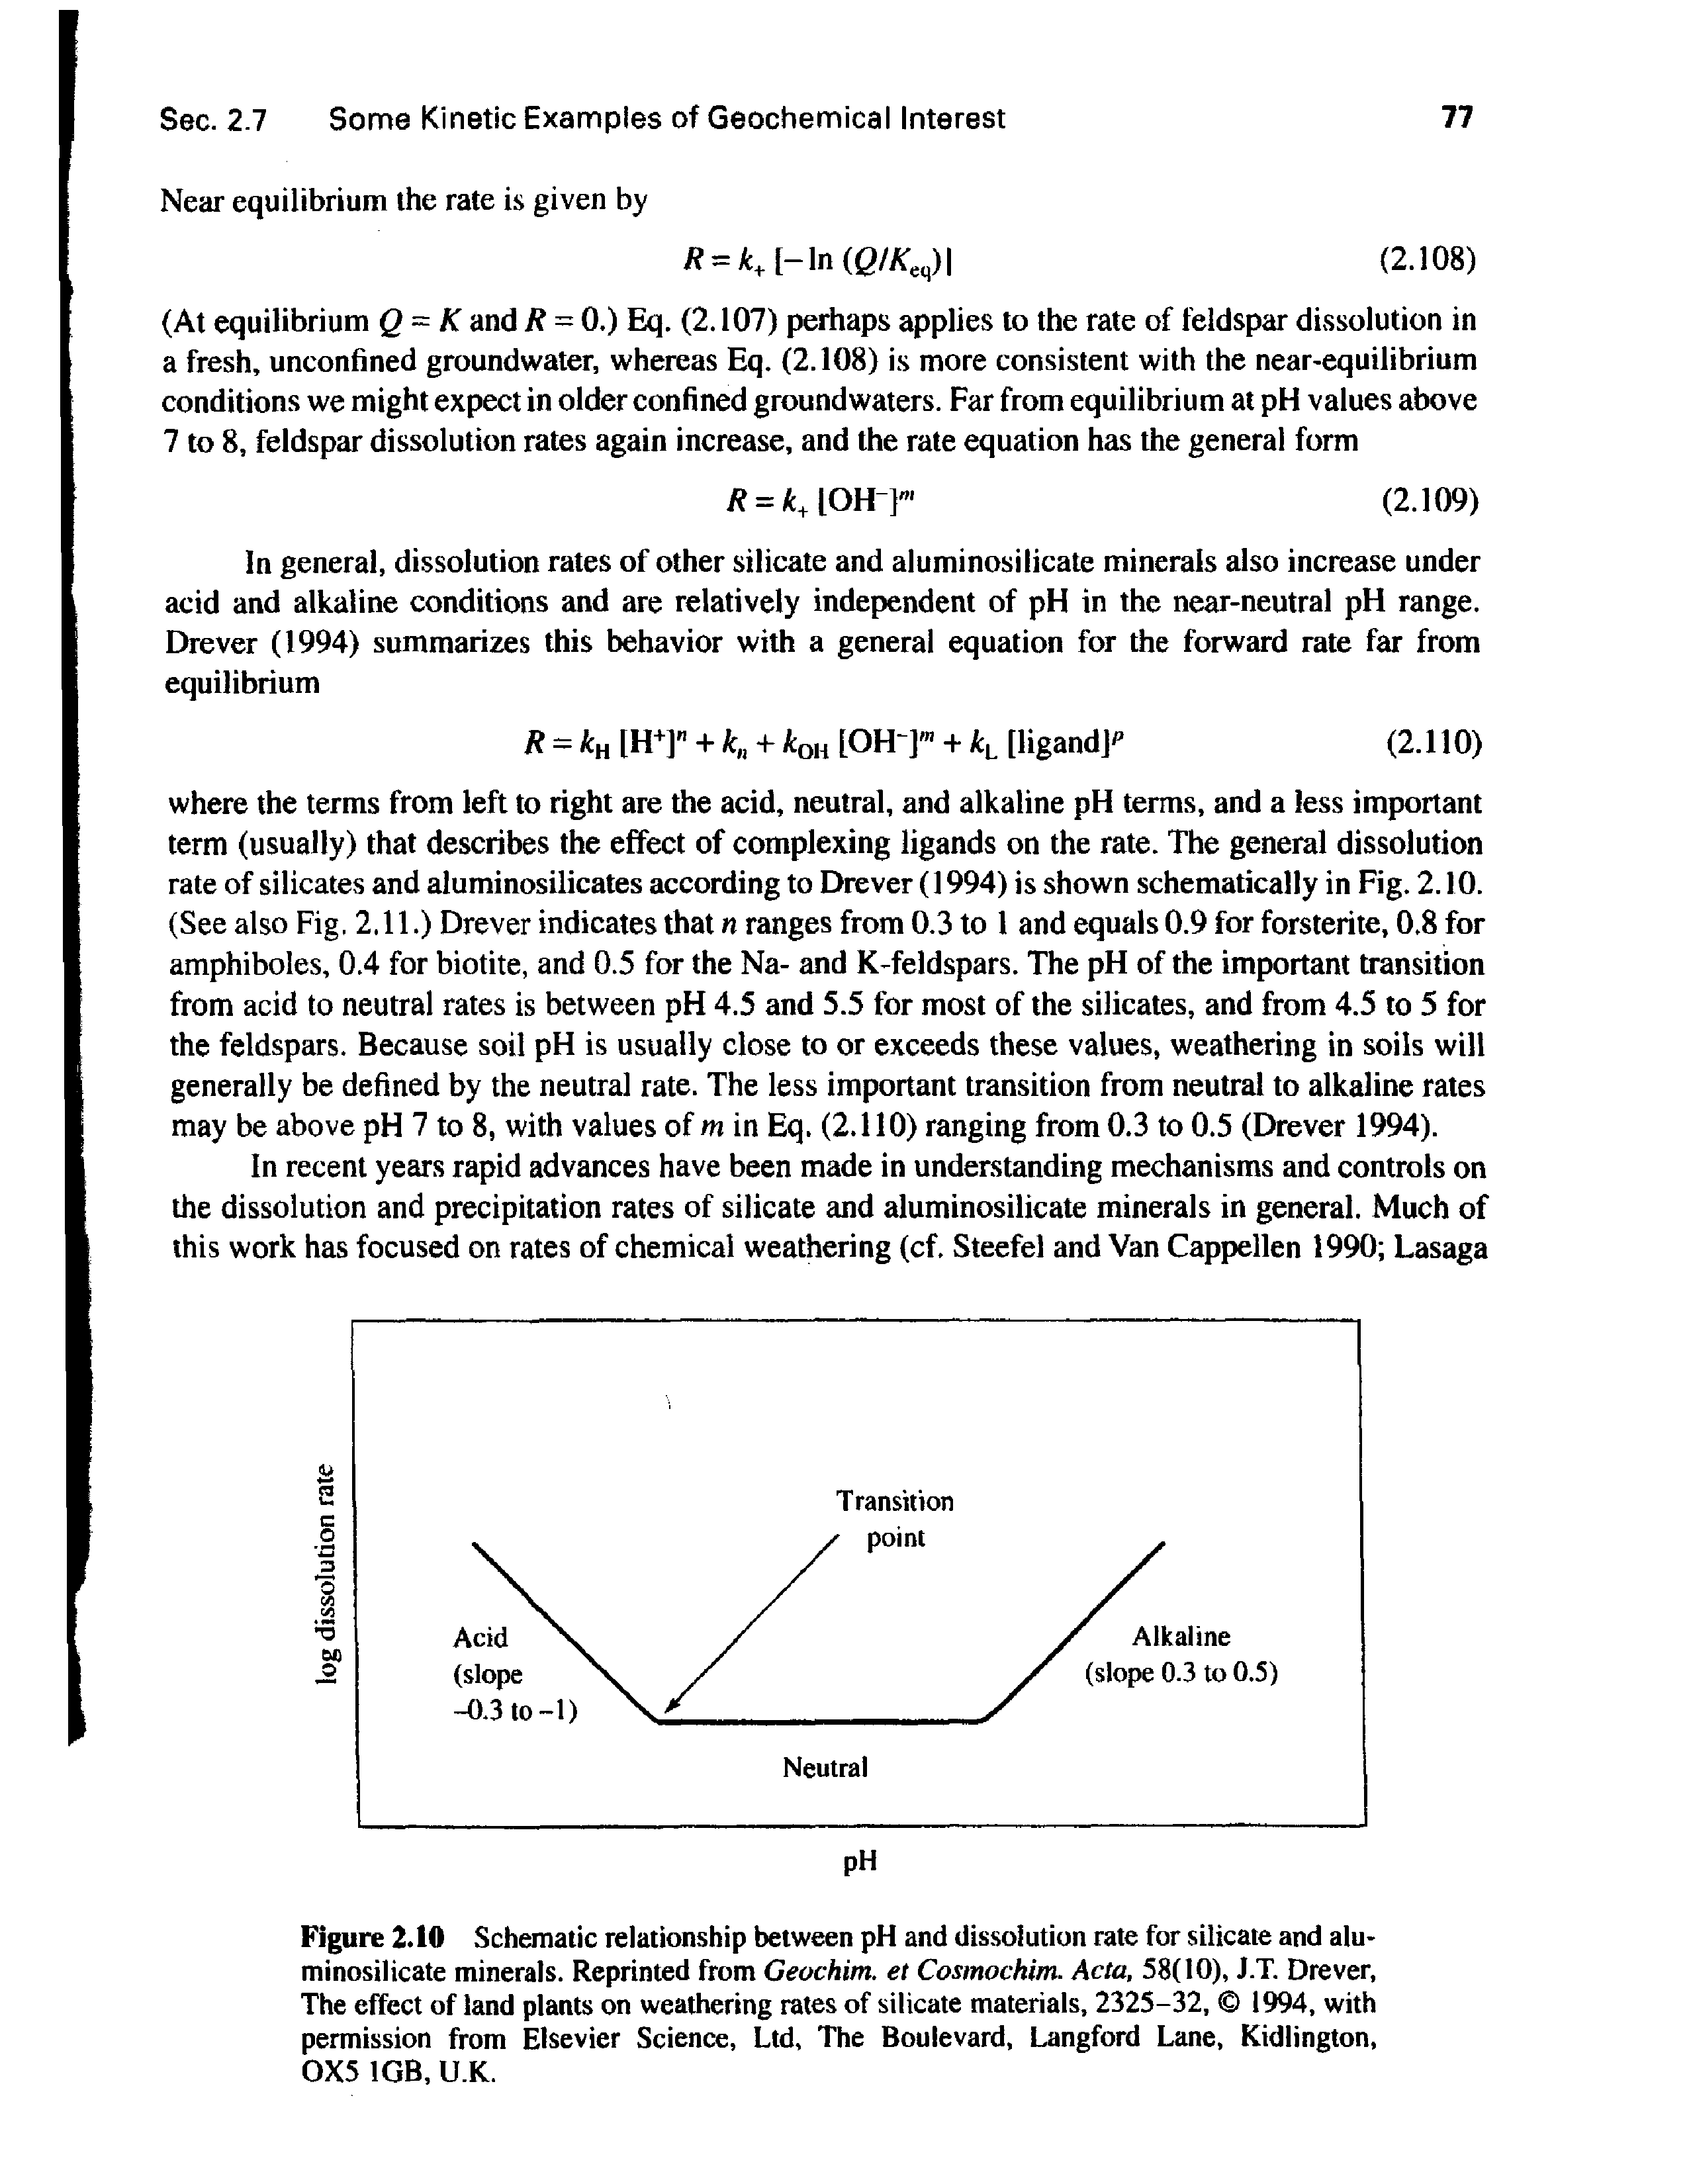 Figure 2.10 Schematic relationship between pH and dissolution rate for silicate and aluminosilicate minerals. Reprinted from Geochim. et Cosmochim. Acta, 58(10), J.T. Drever, The effect of land plants on weathering rates of silicate materials, 2325-32, 1994, with permission from Elsevier Science, Ltd, The Boulevard, Langford Lane, Kidlington, 0X5 1GB, U K.